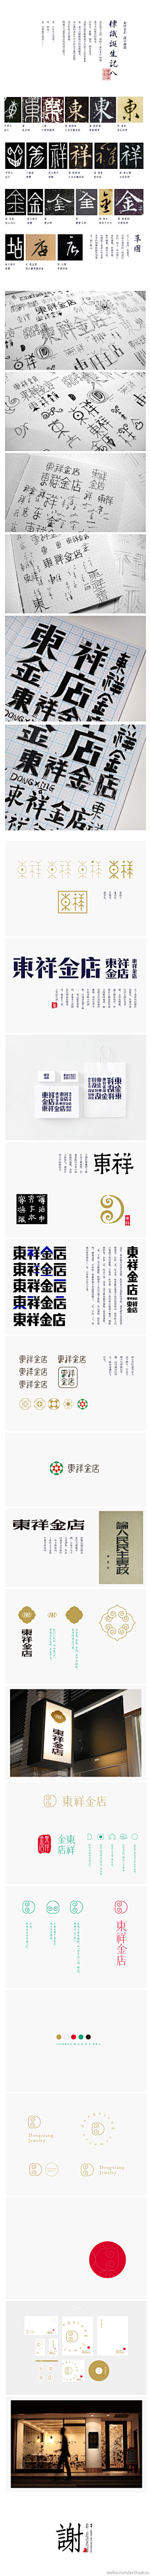 Personality123采集到字体设计